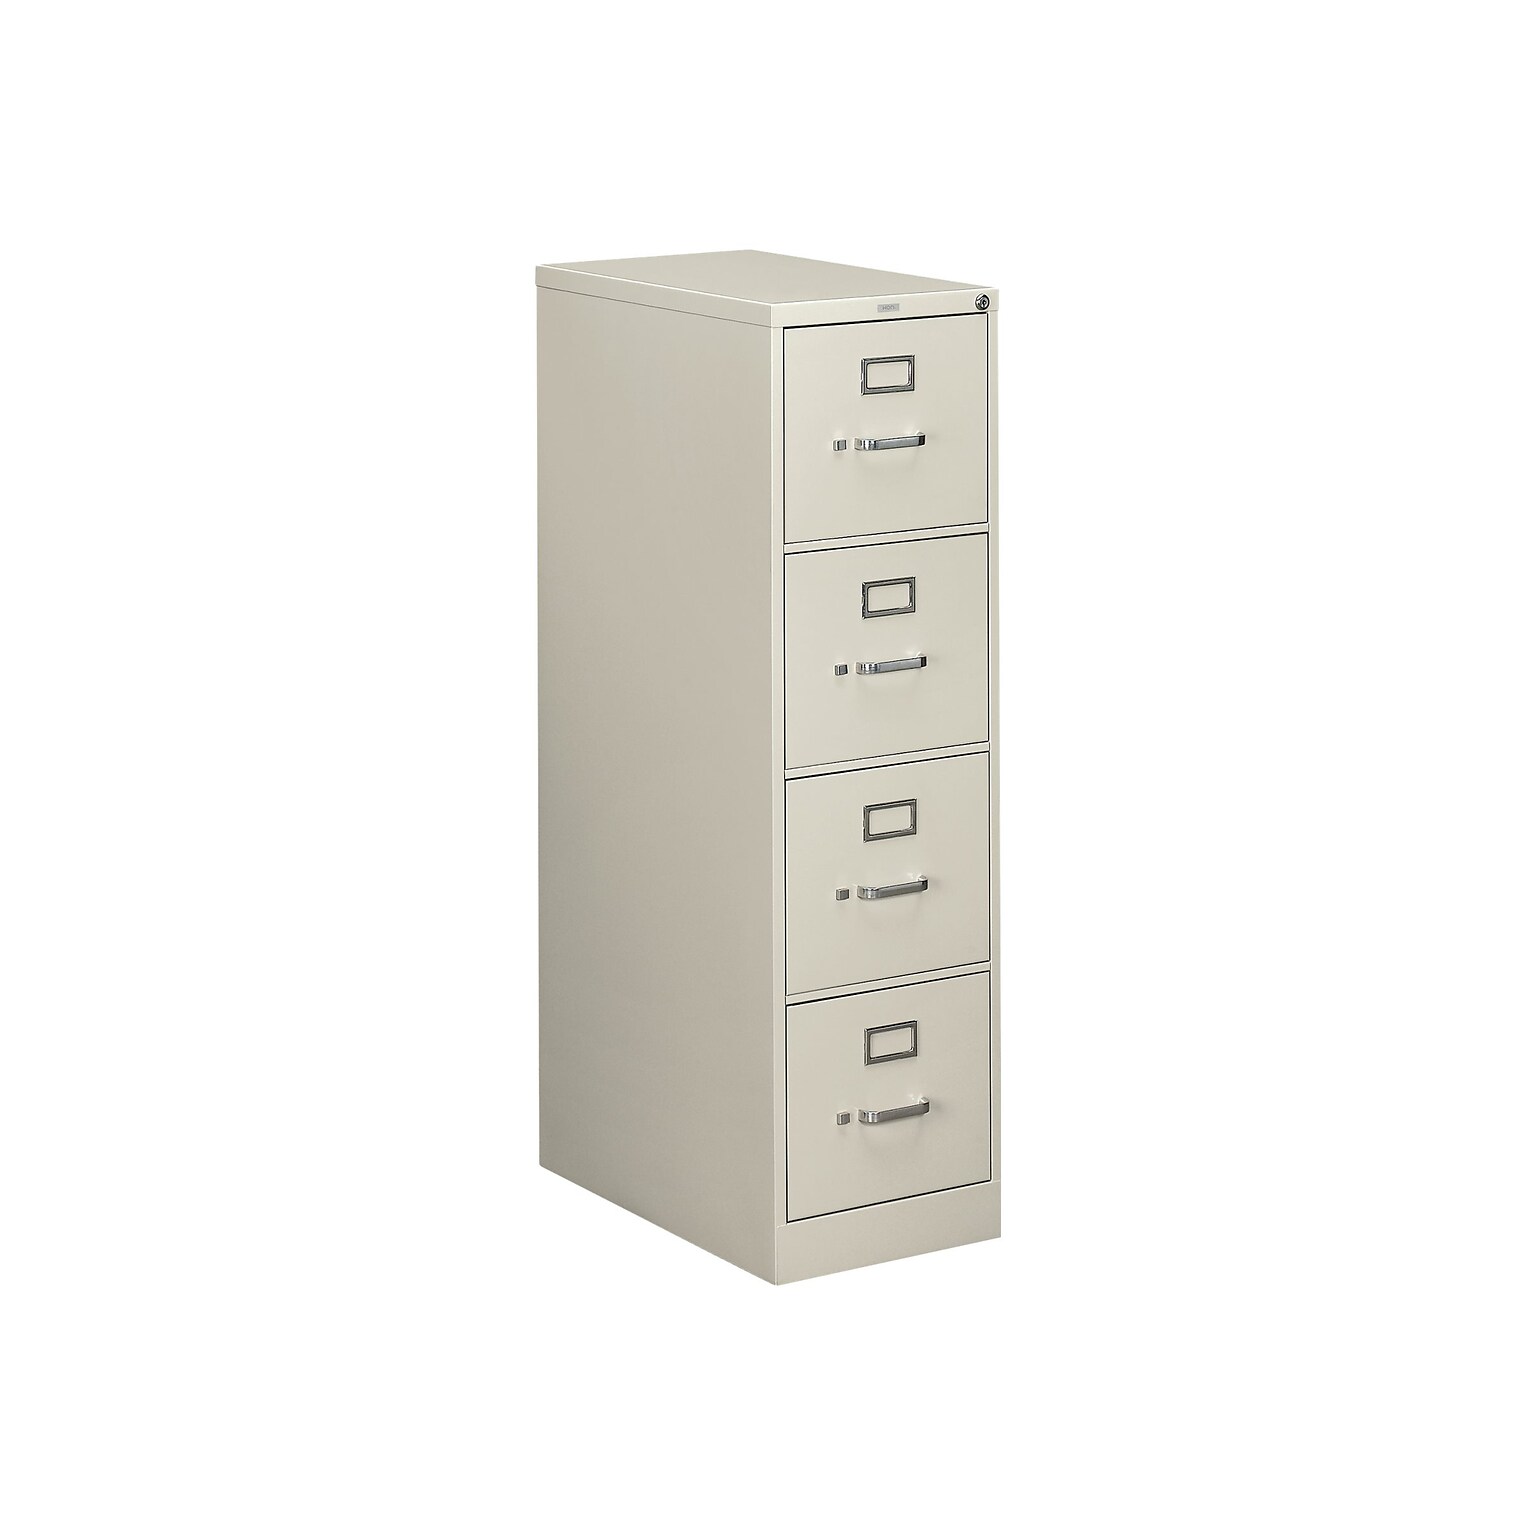 HON 510 Series 4-Drawer Vertical File Cabinet, Letter Size, Lockable, 52H x 15W x 25D, Light Gray (HON514PQ)